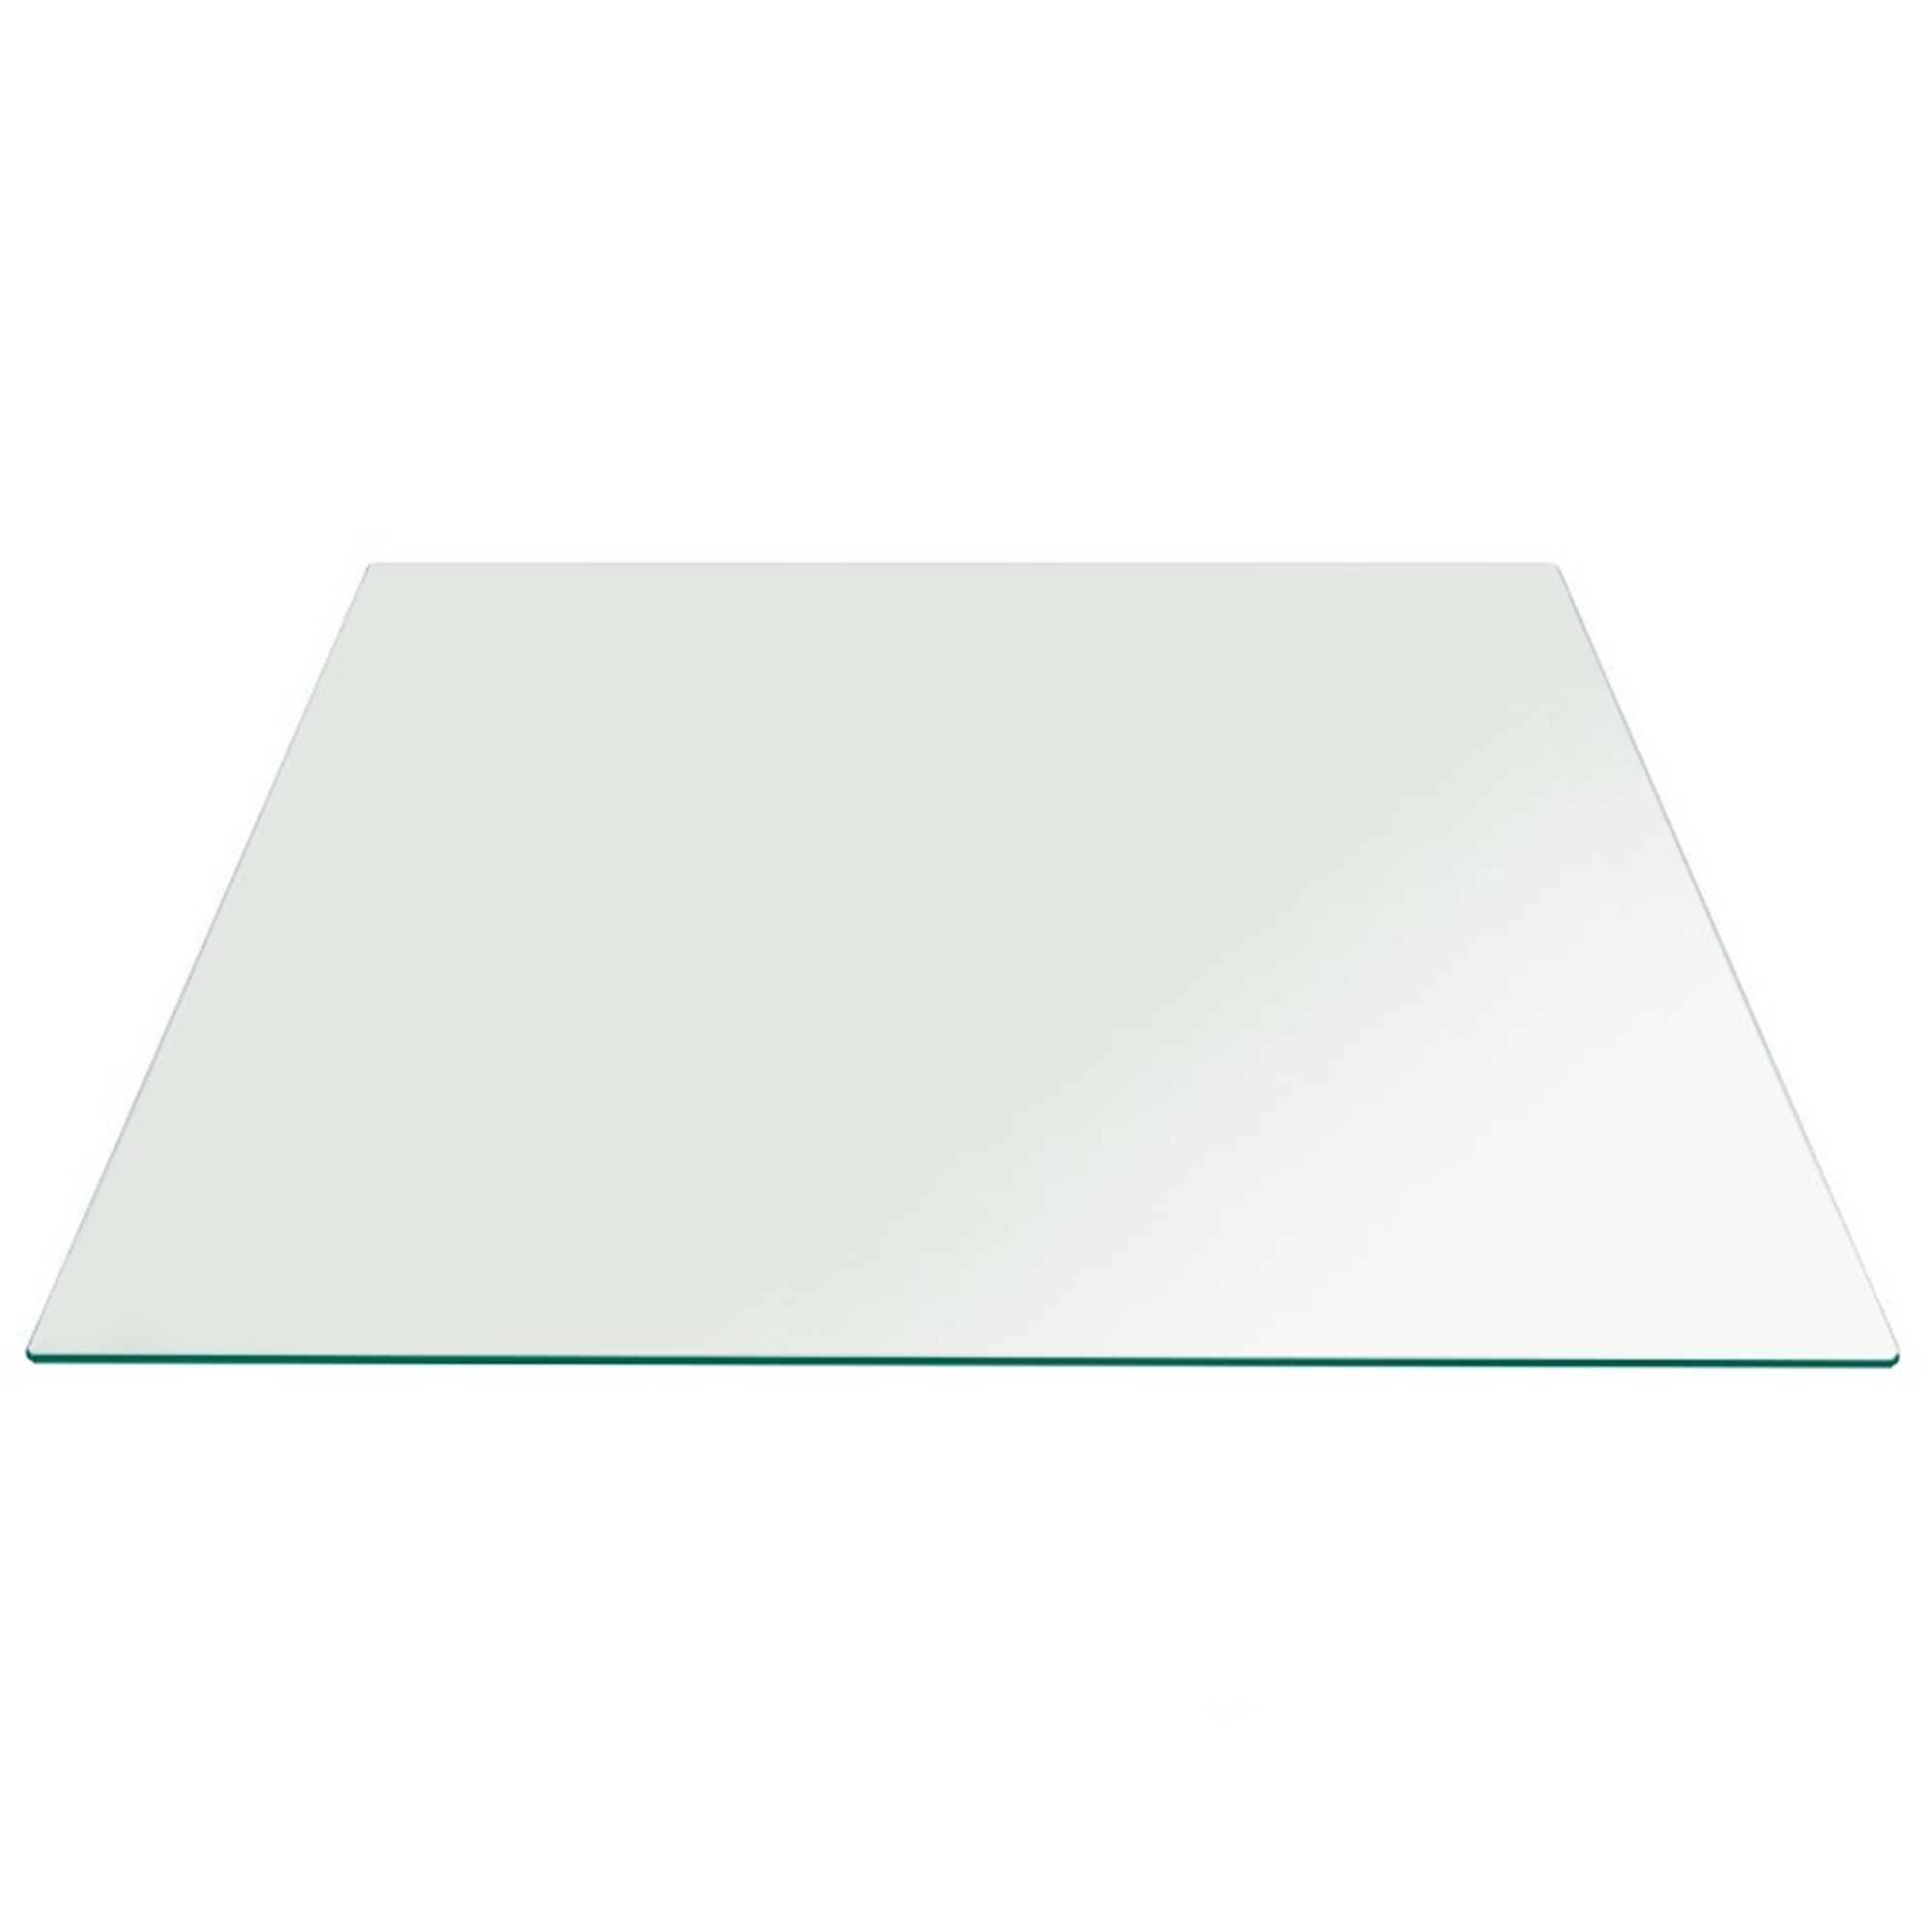 22" Inch Square Glass 1/4" Thick Flat Polished Tempered Eased Corners 